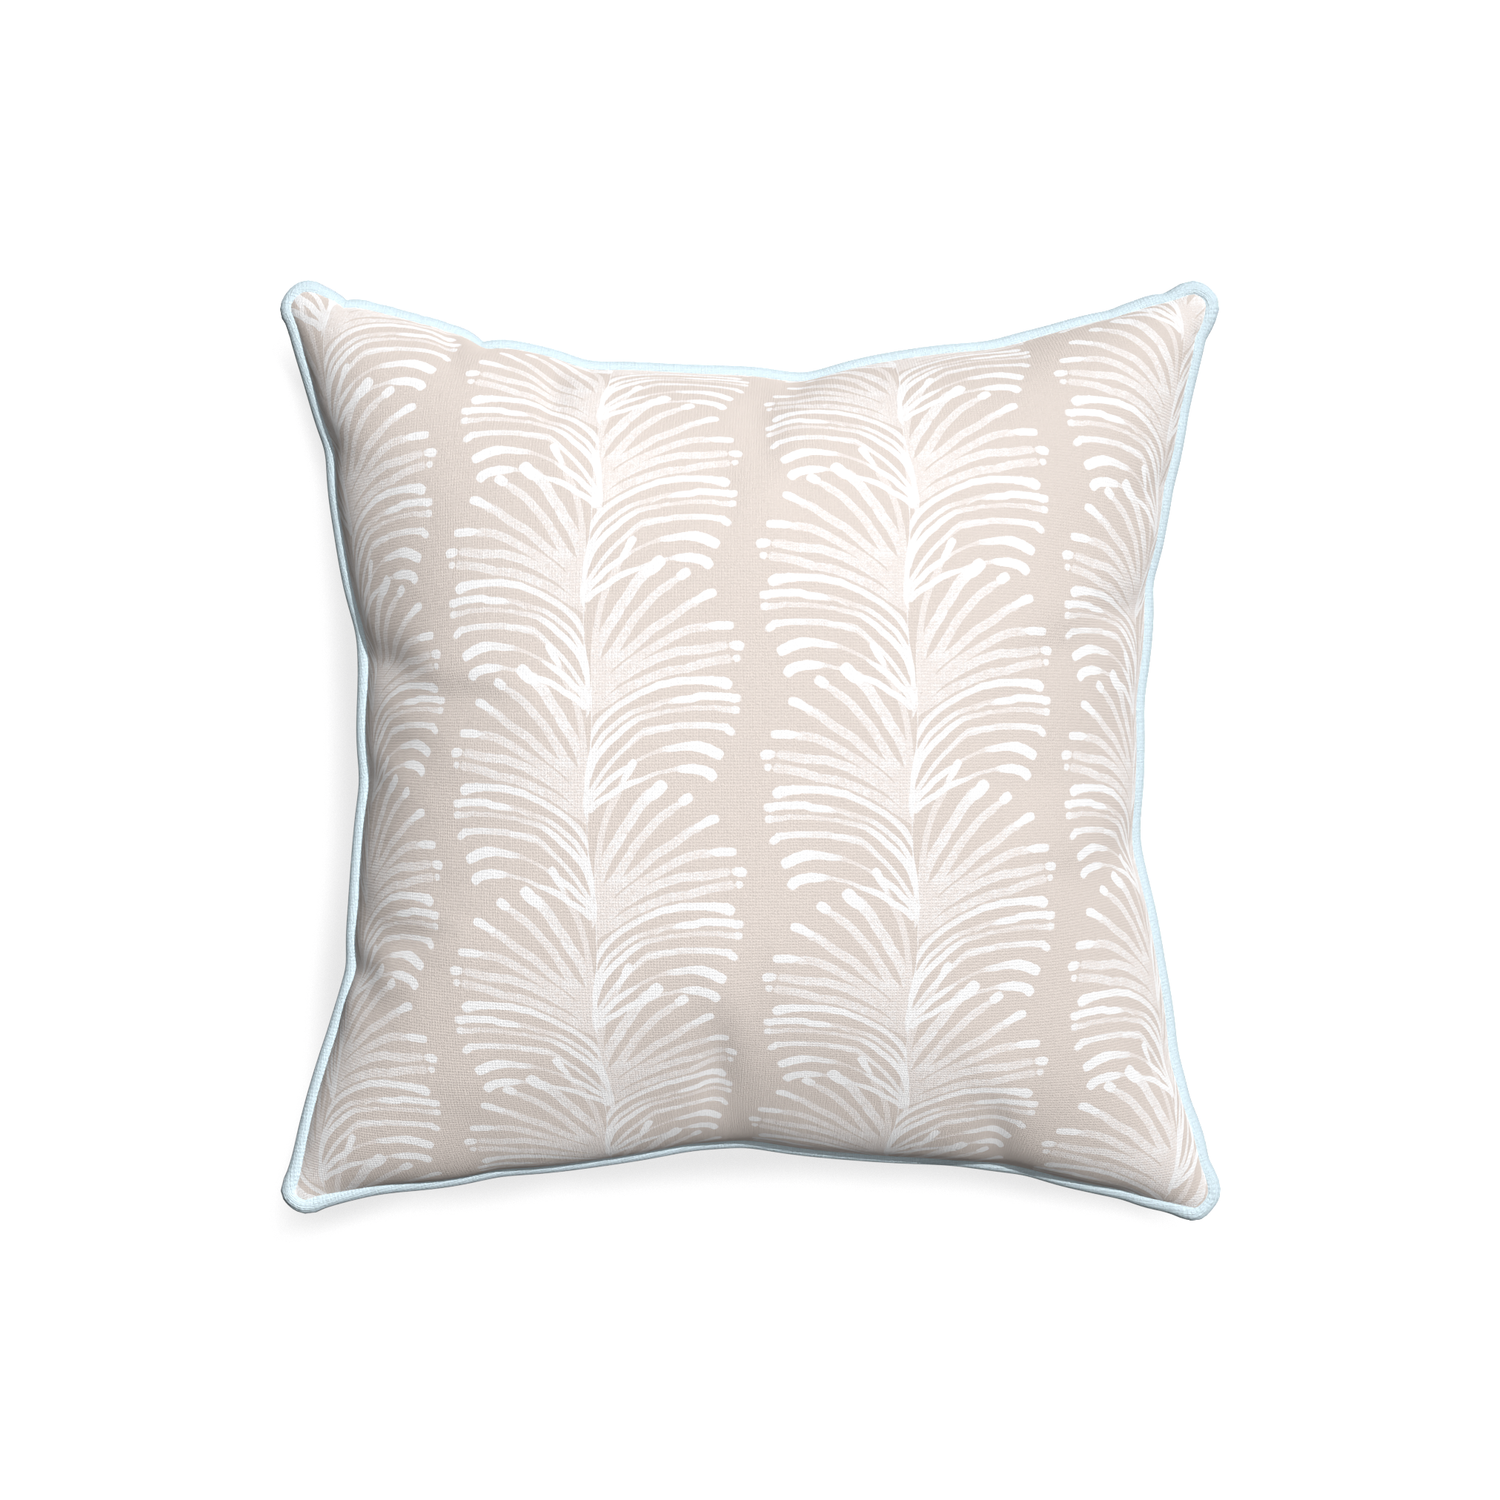 20-square emma sand custom sand colored botanical stripepillow with powder piping on white background